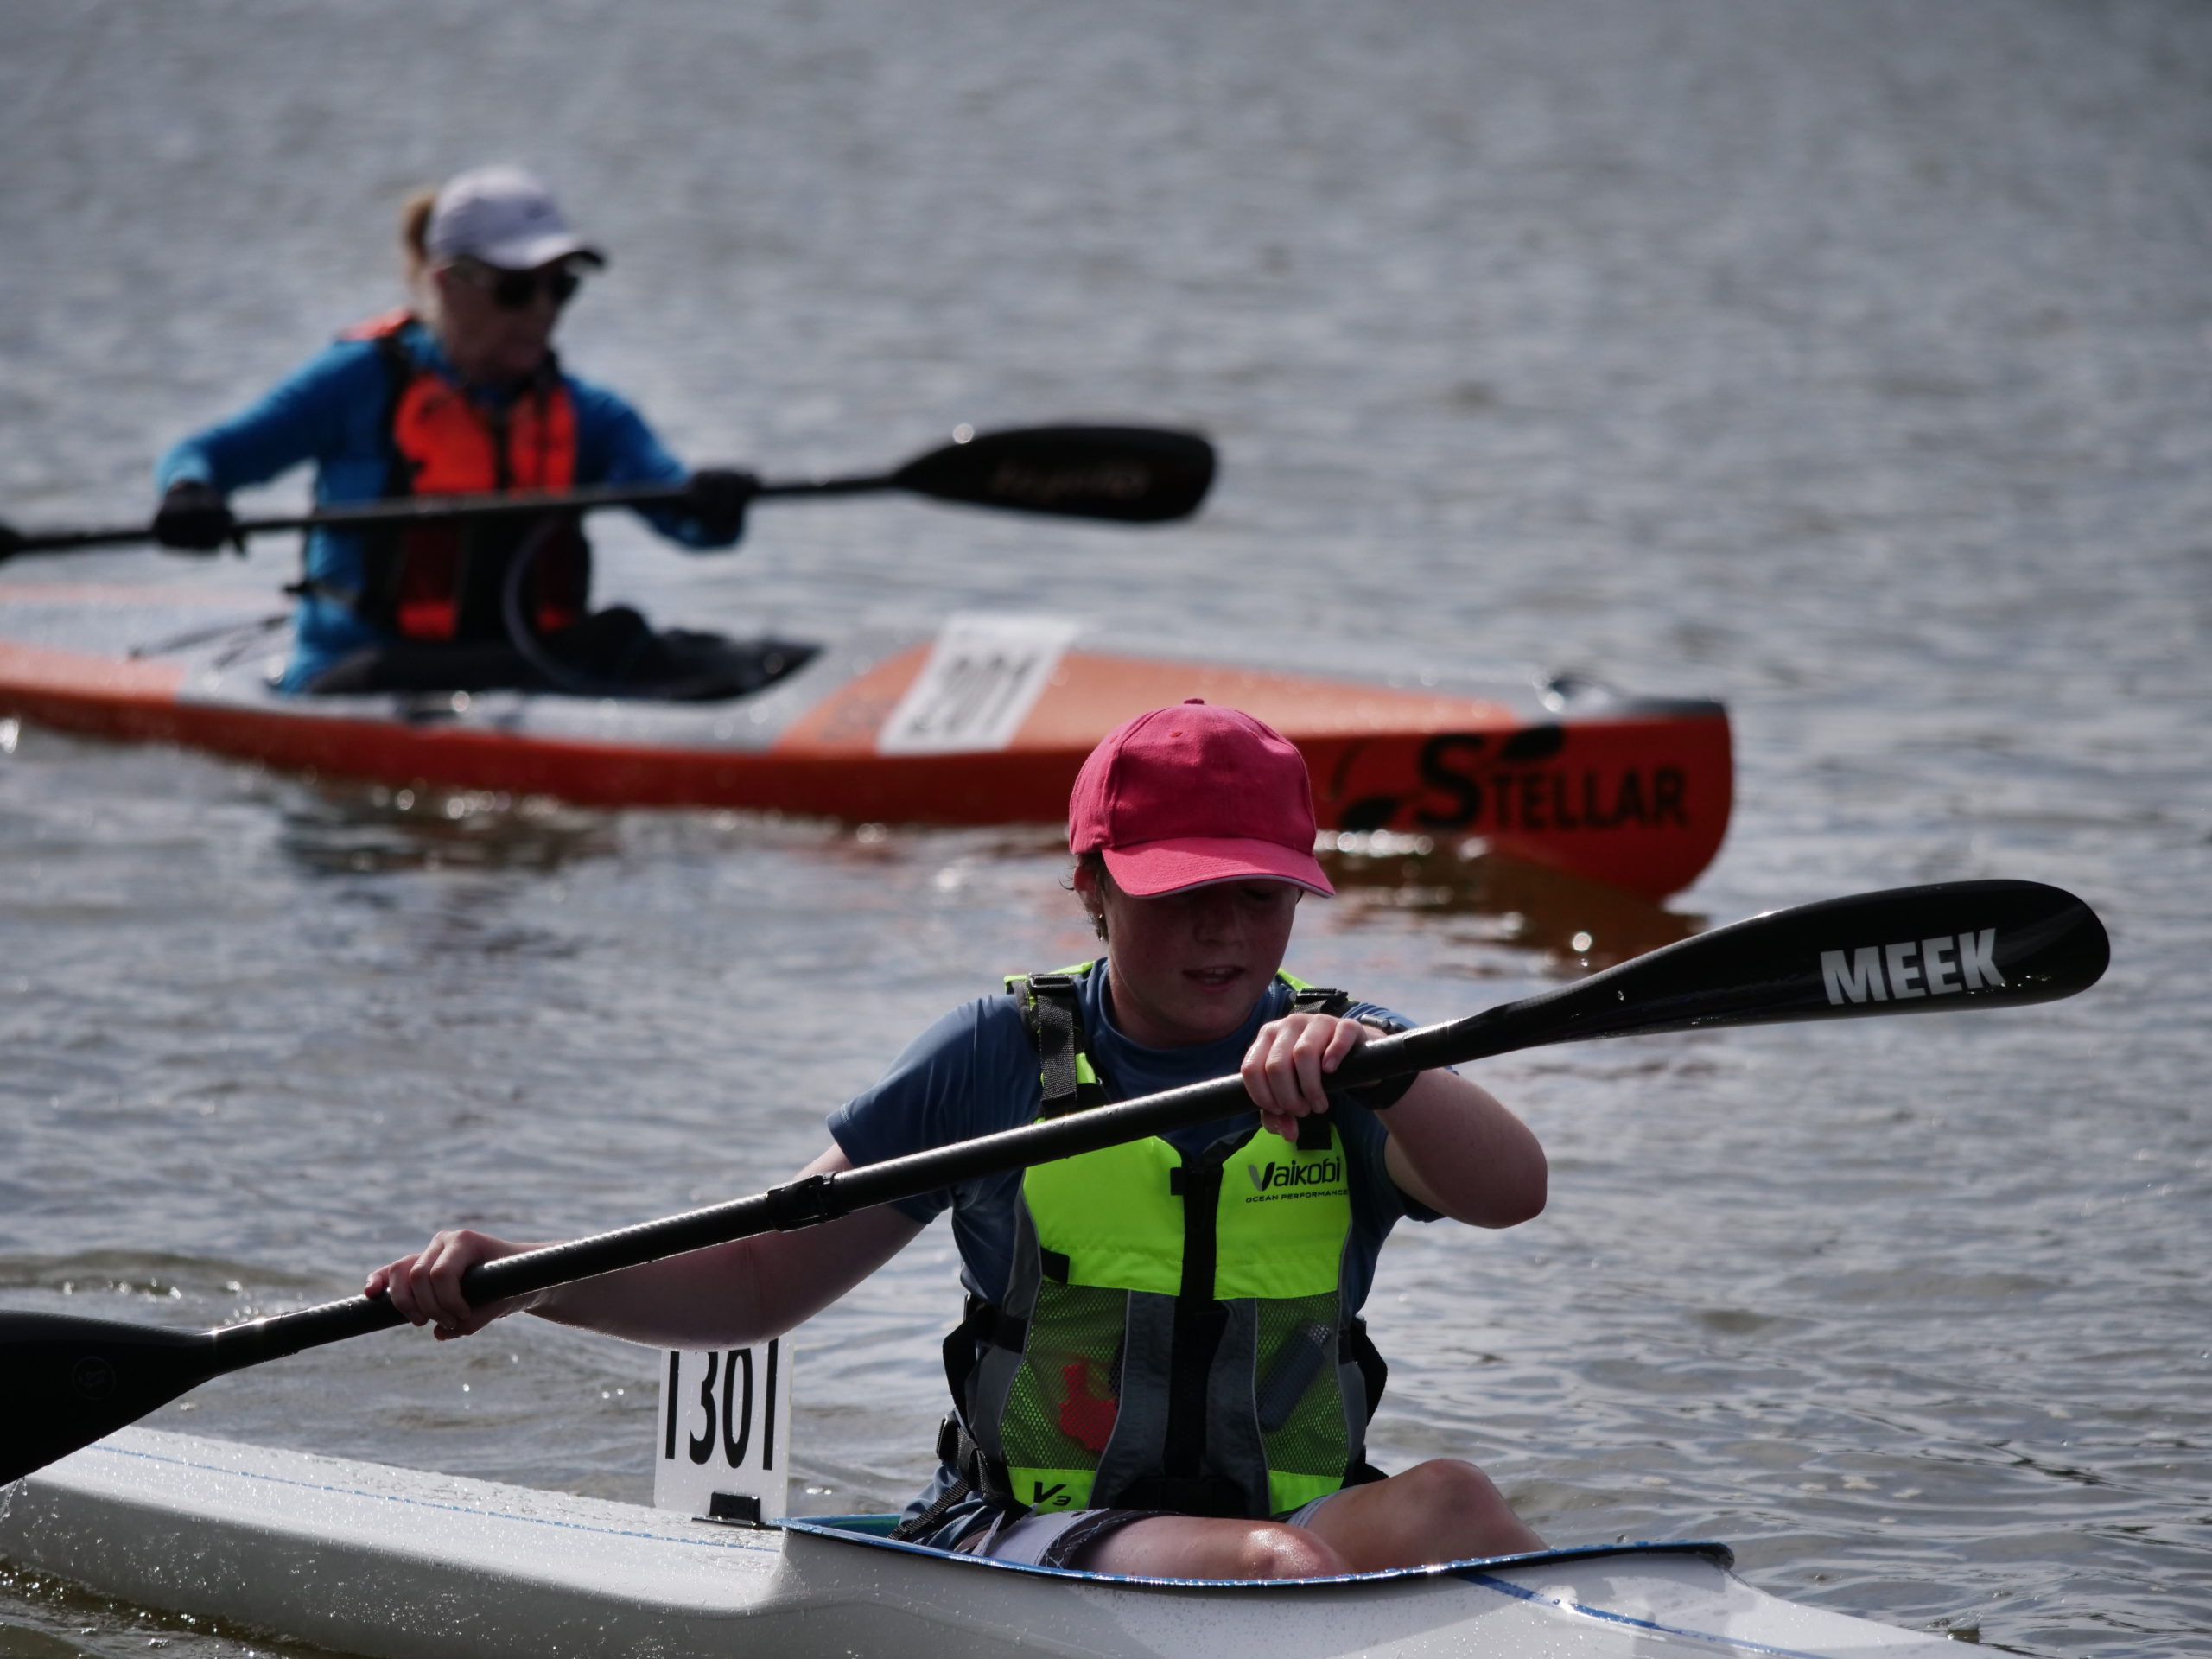 2021 - Teralba Marathon, Bailey in the foreground, paddler in red ski in the backgroundl